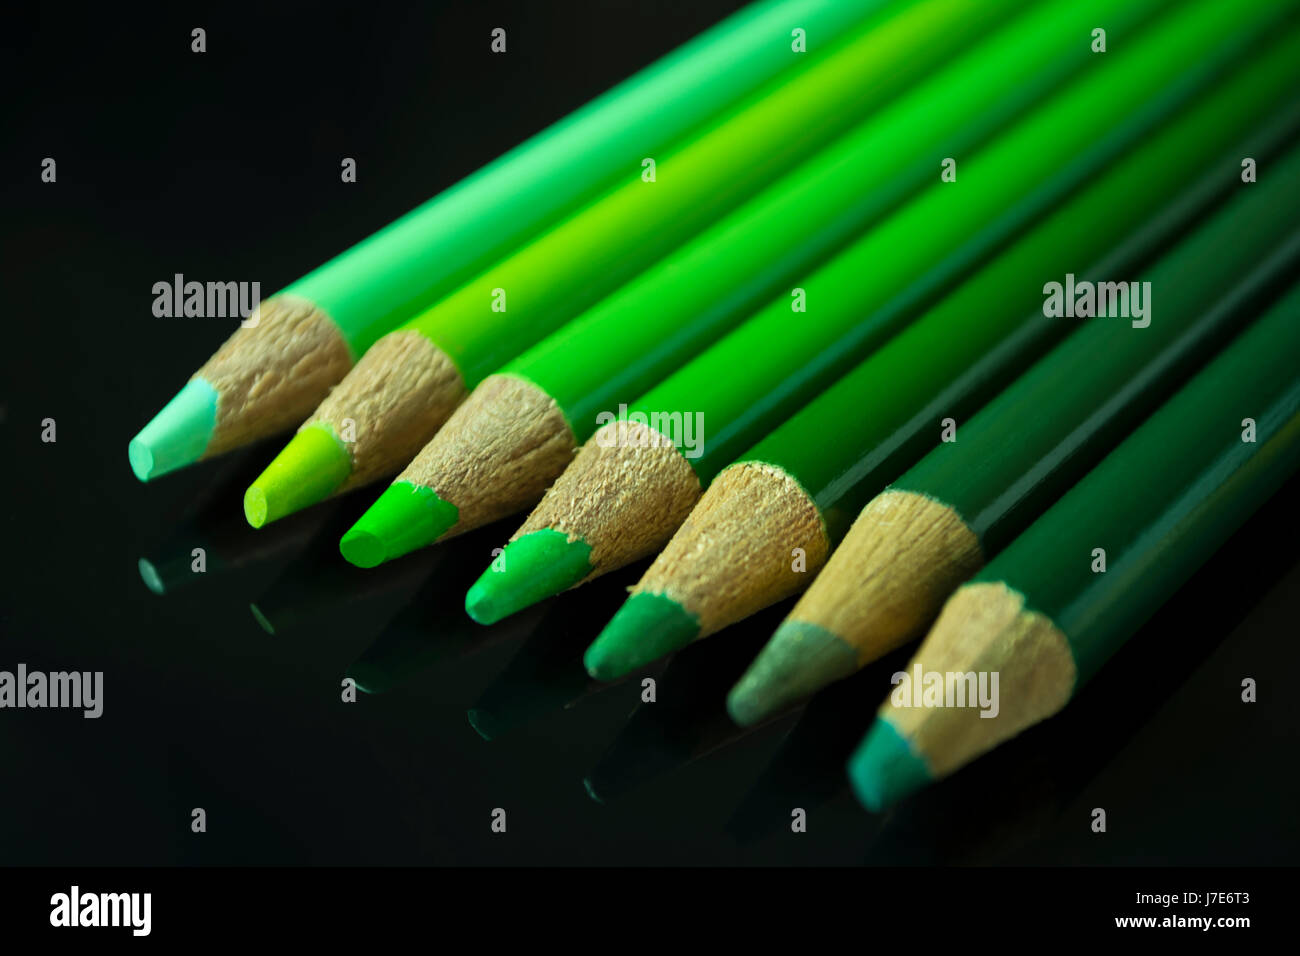 Seven green pencils of various shades and hues, lined up from light to dark on a black reflective surface. Stock Photo